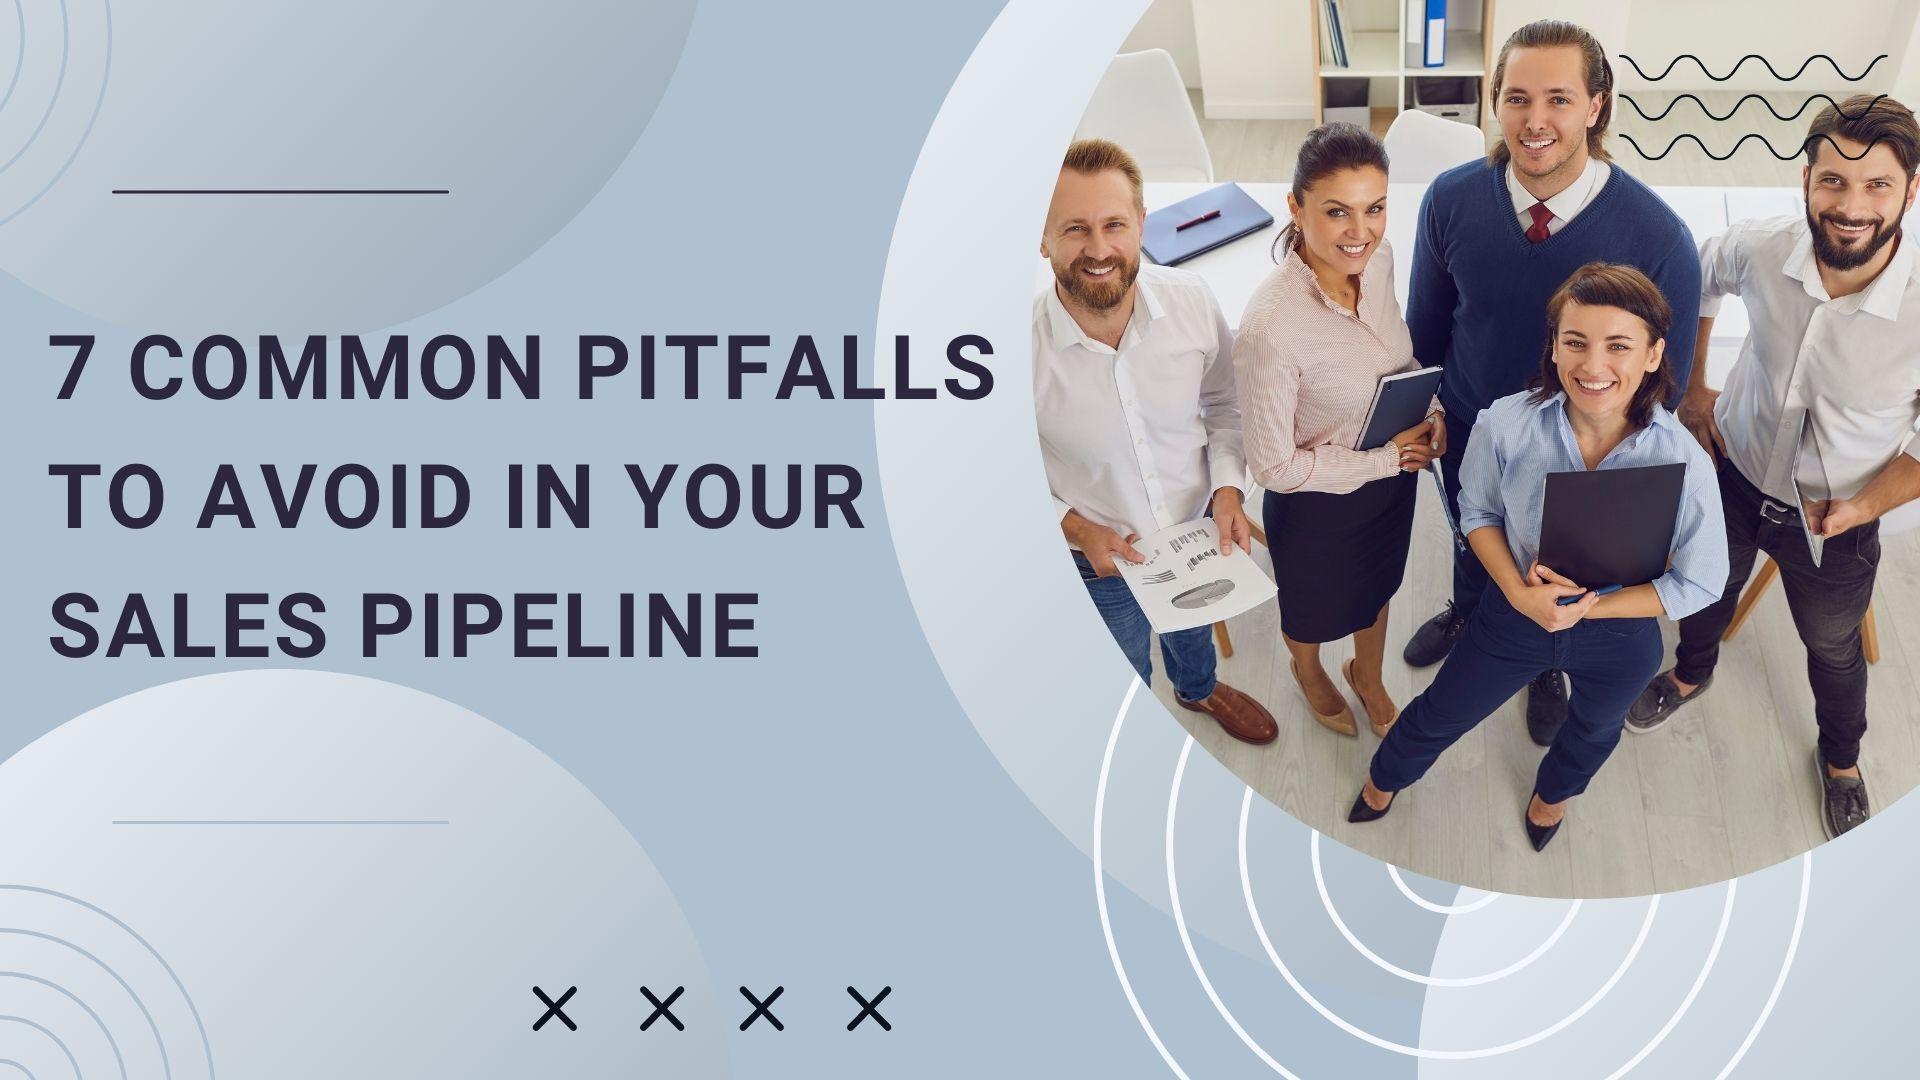 7 Common Pitfalls to Avoid in Your Sales Pipeline